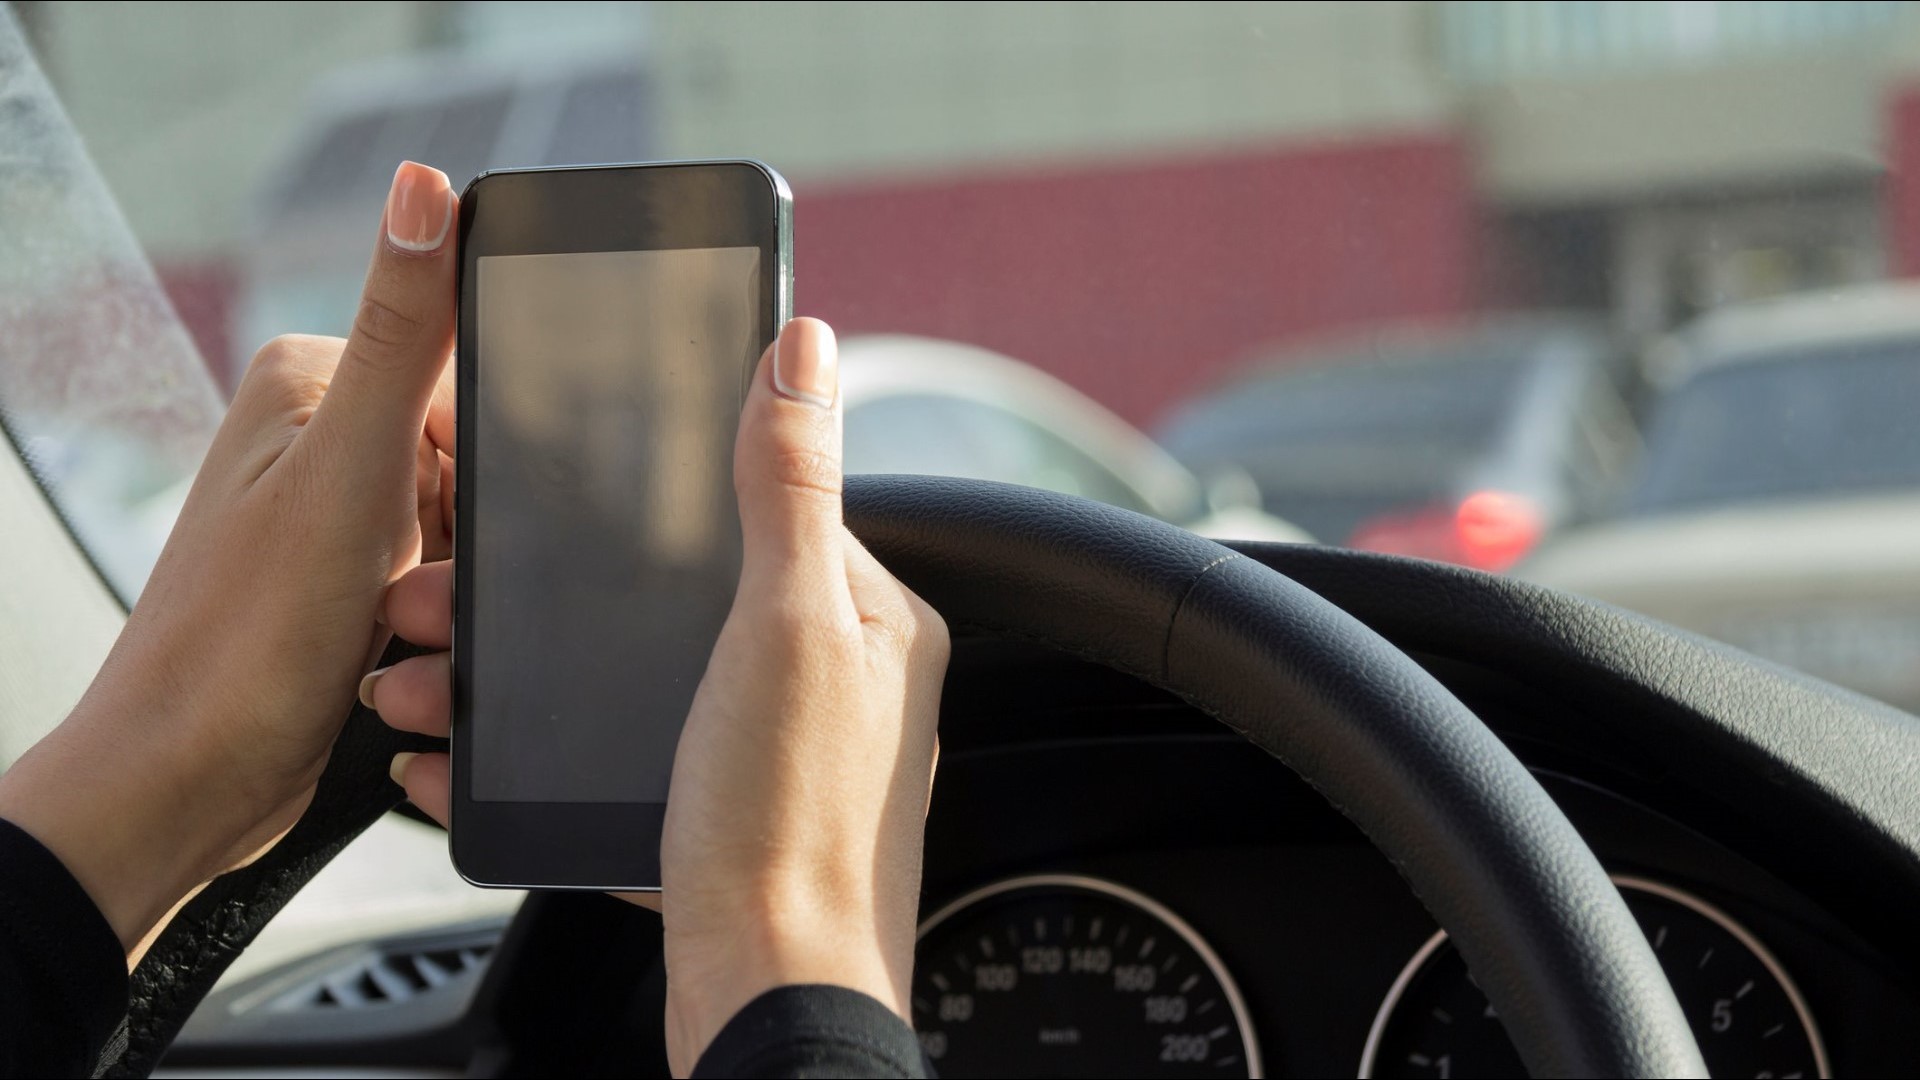 The proposed legislation would allow drivers to hold their cell phones at stoplights.